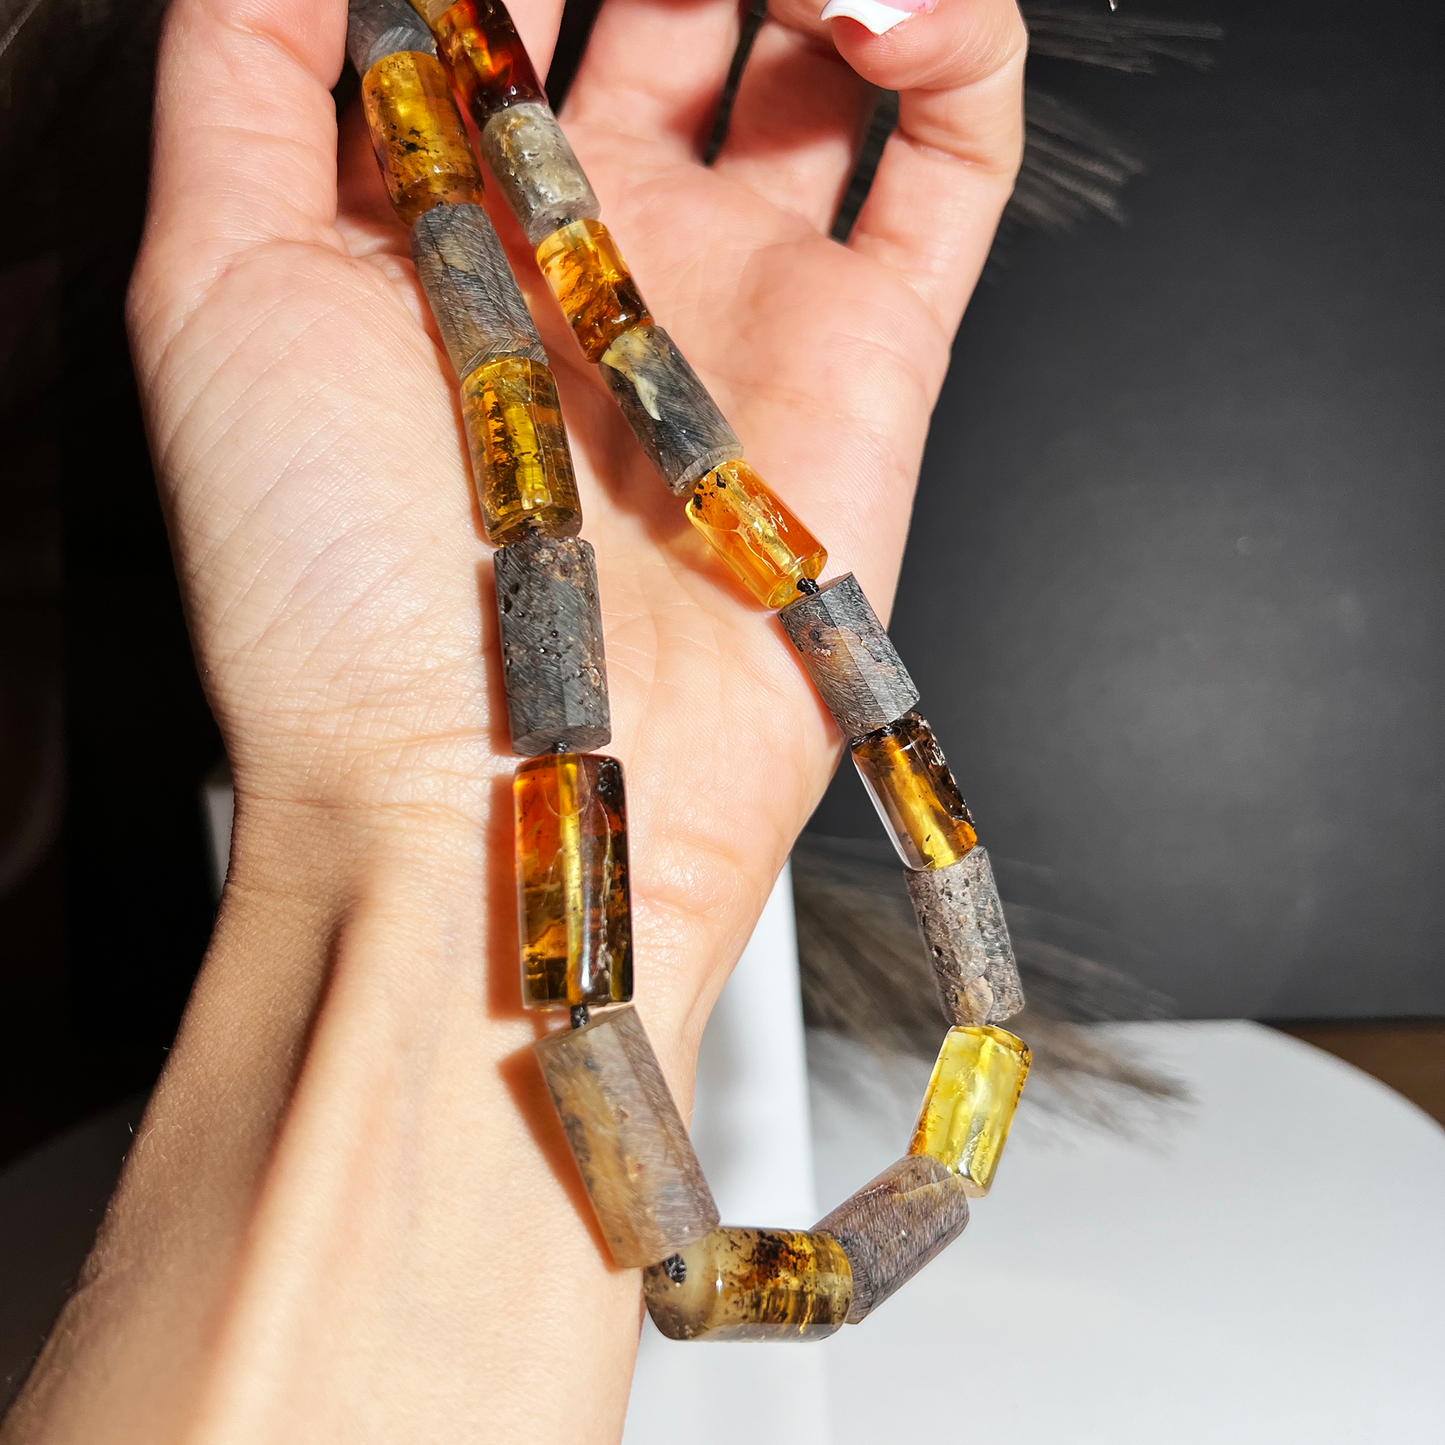 Male amber necklace with moss inclusions "Tiger"